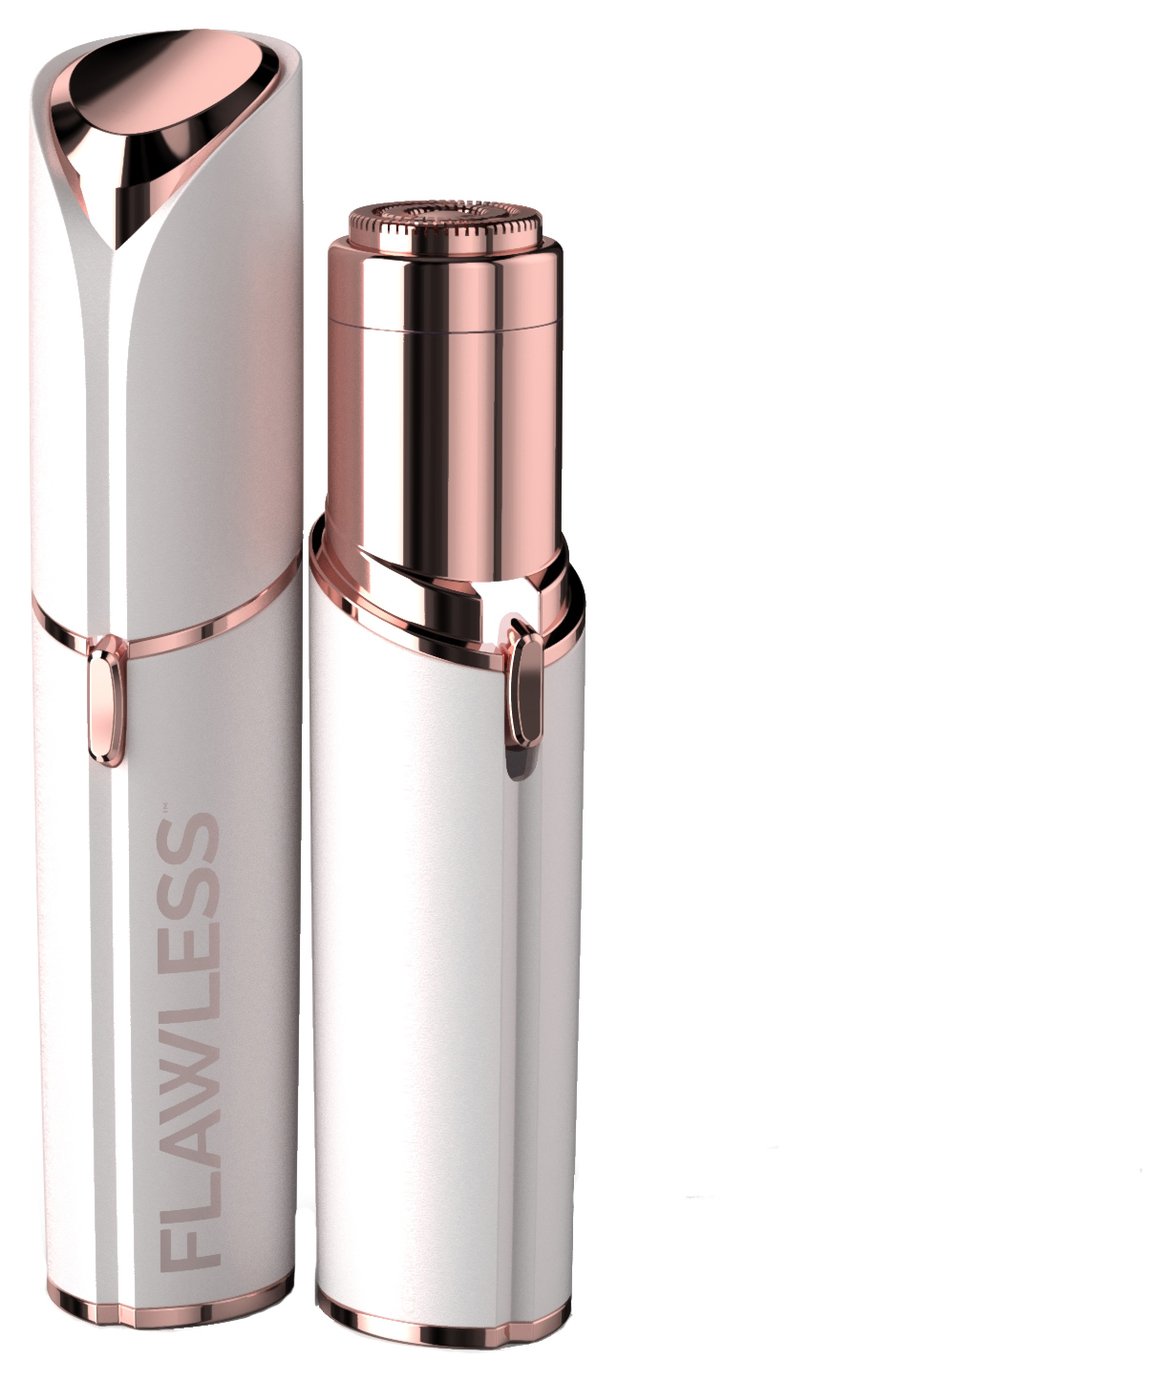 Finishing Touch Flawless Facial Trimmer